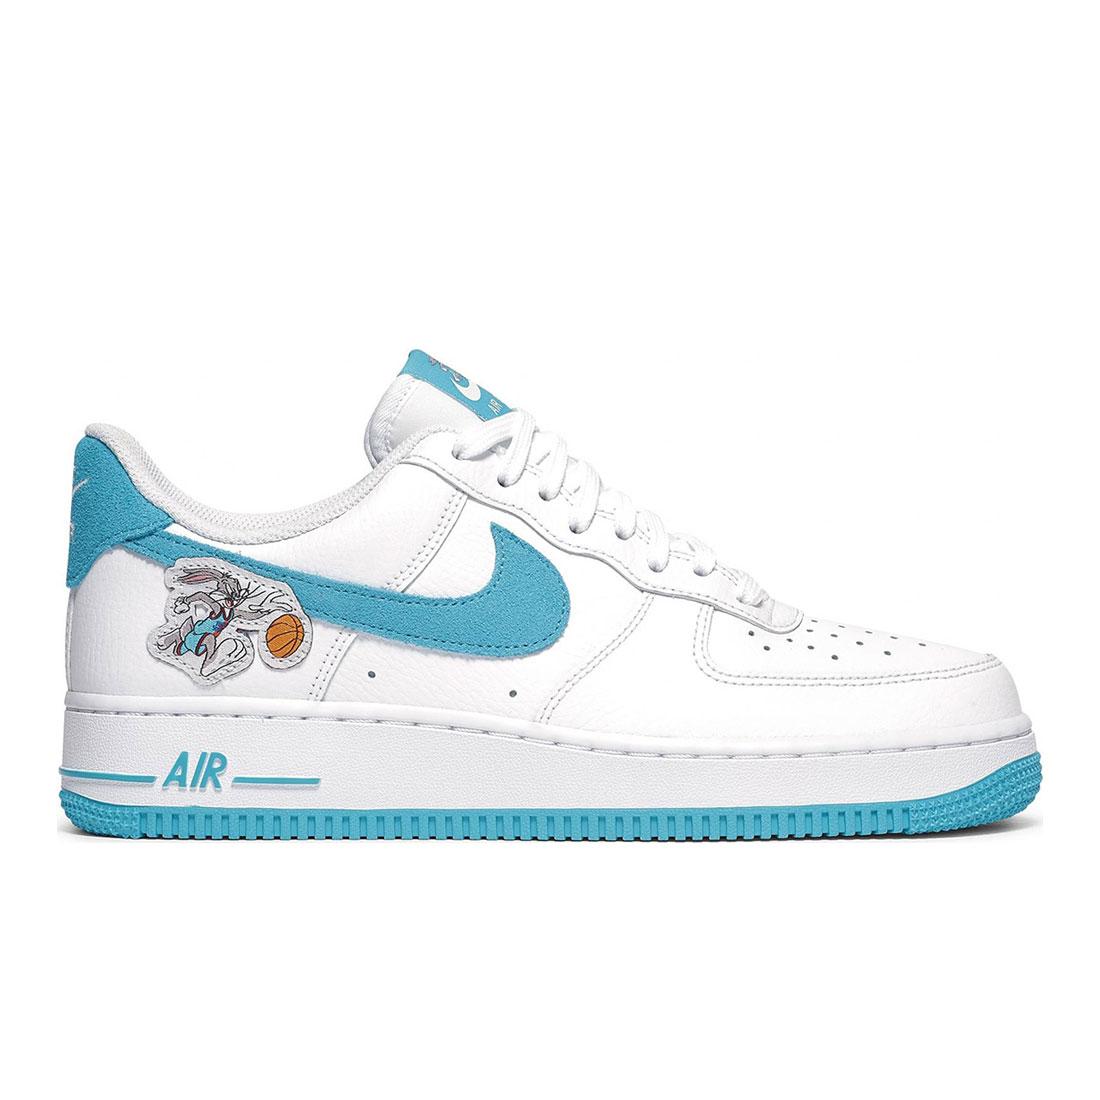 Space Jam X Air Force 1 07 Low Hare